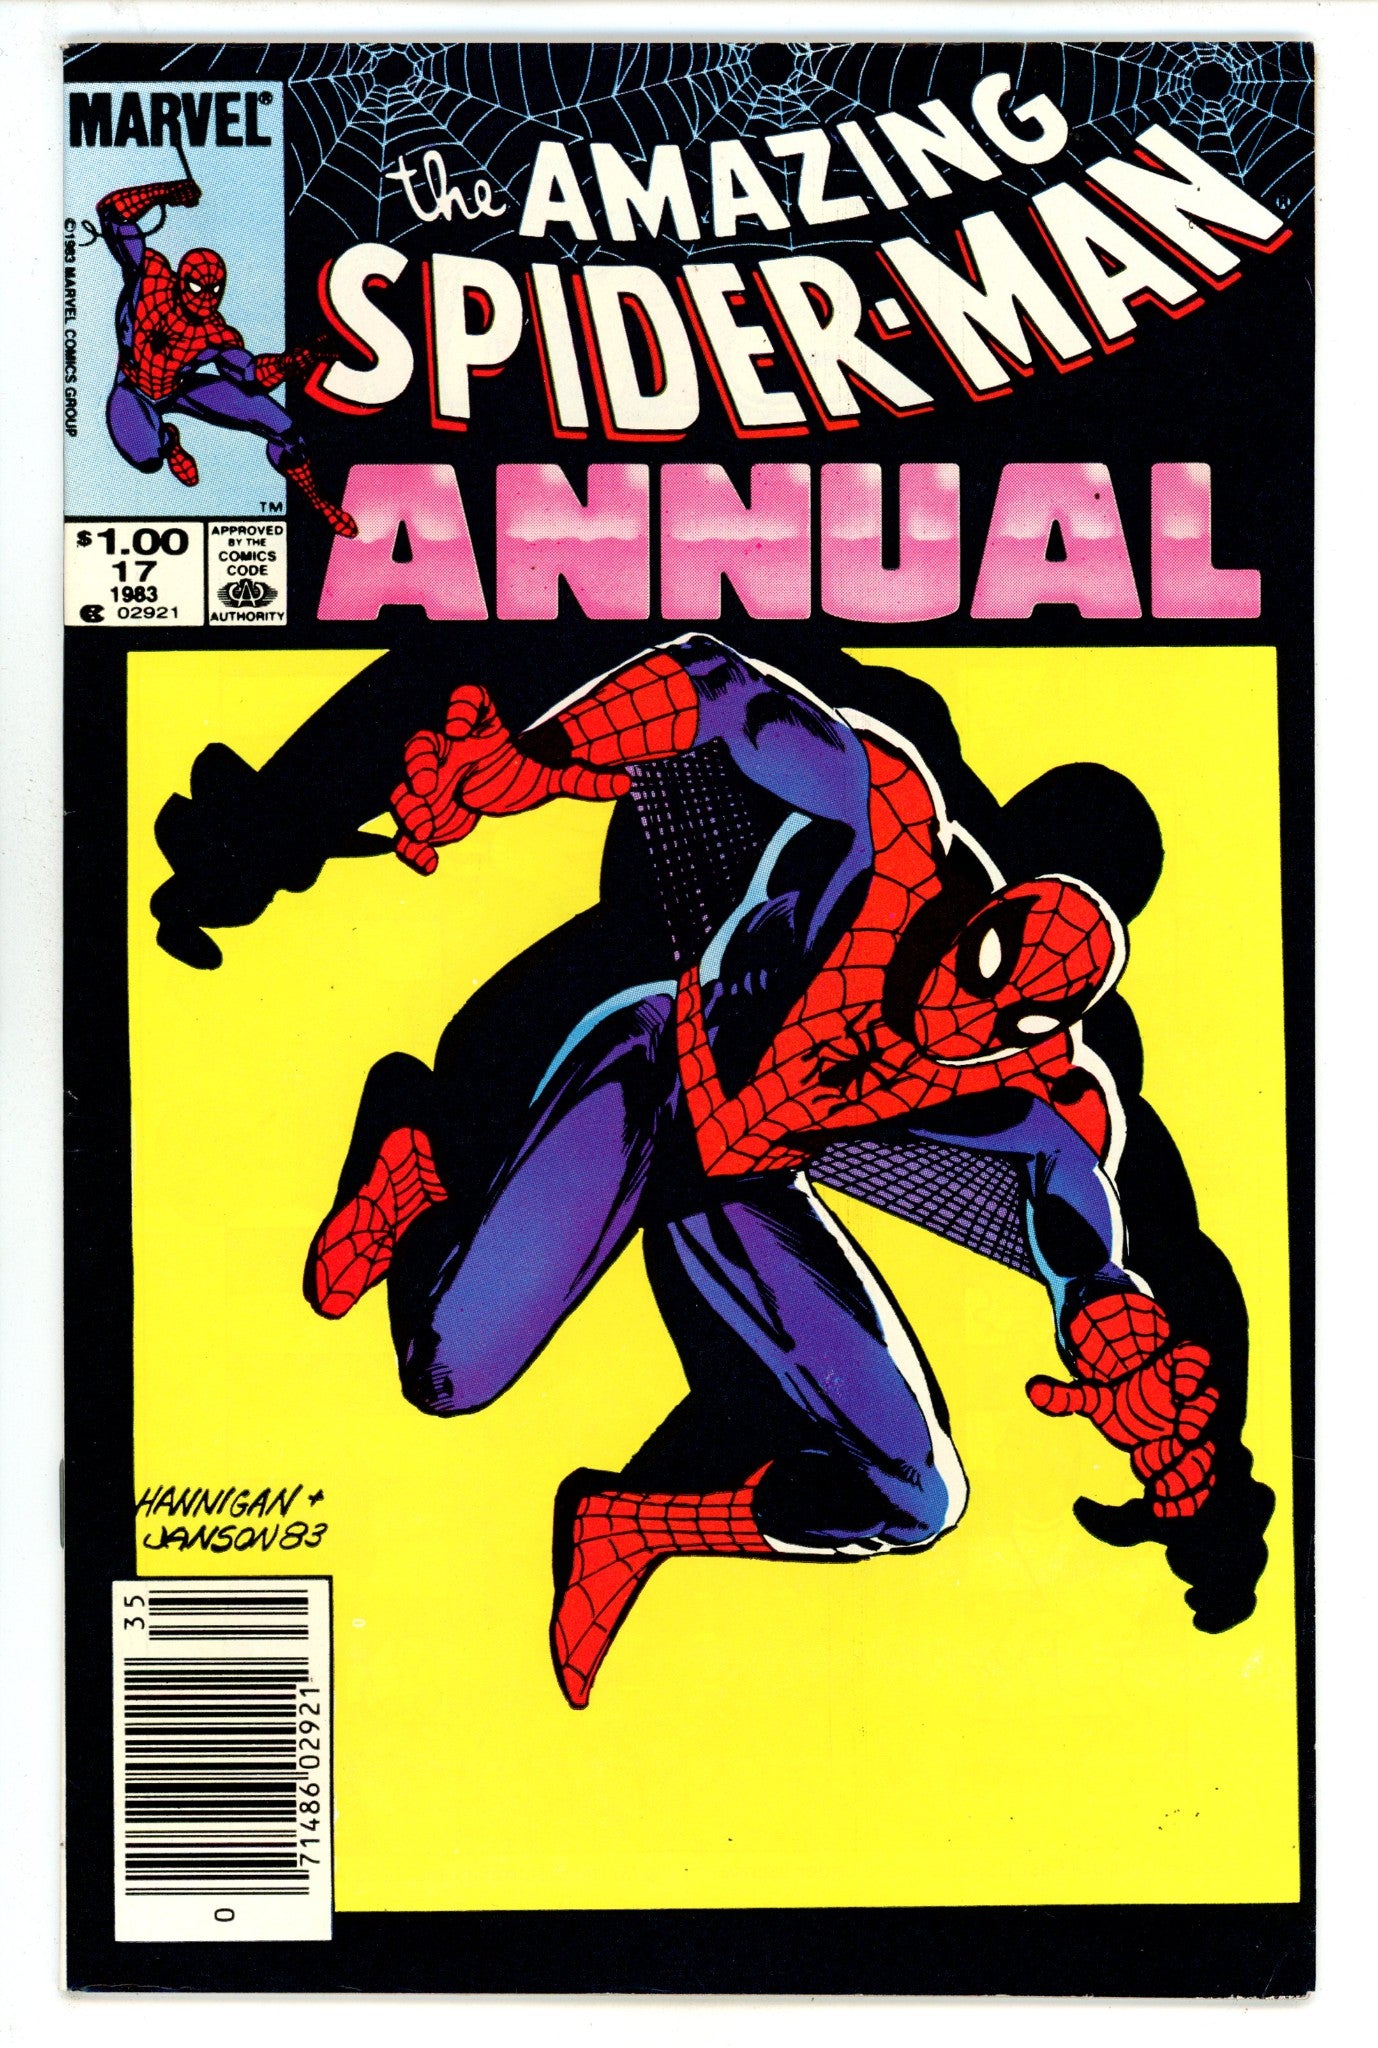 The Amazing Spider-Man Annual Vol 1 17 FN+ (6.5) (1983) Newsstand 